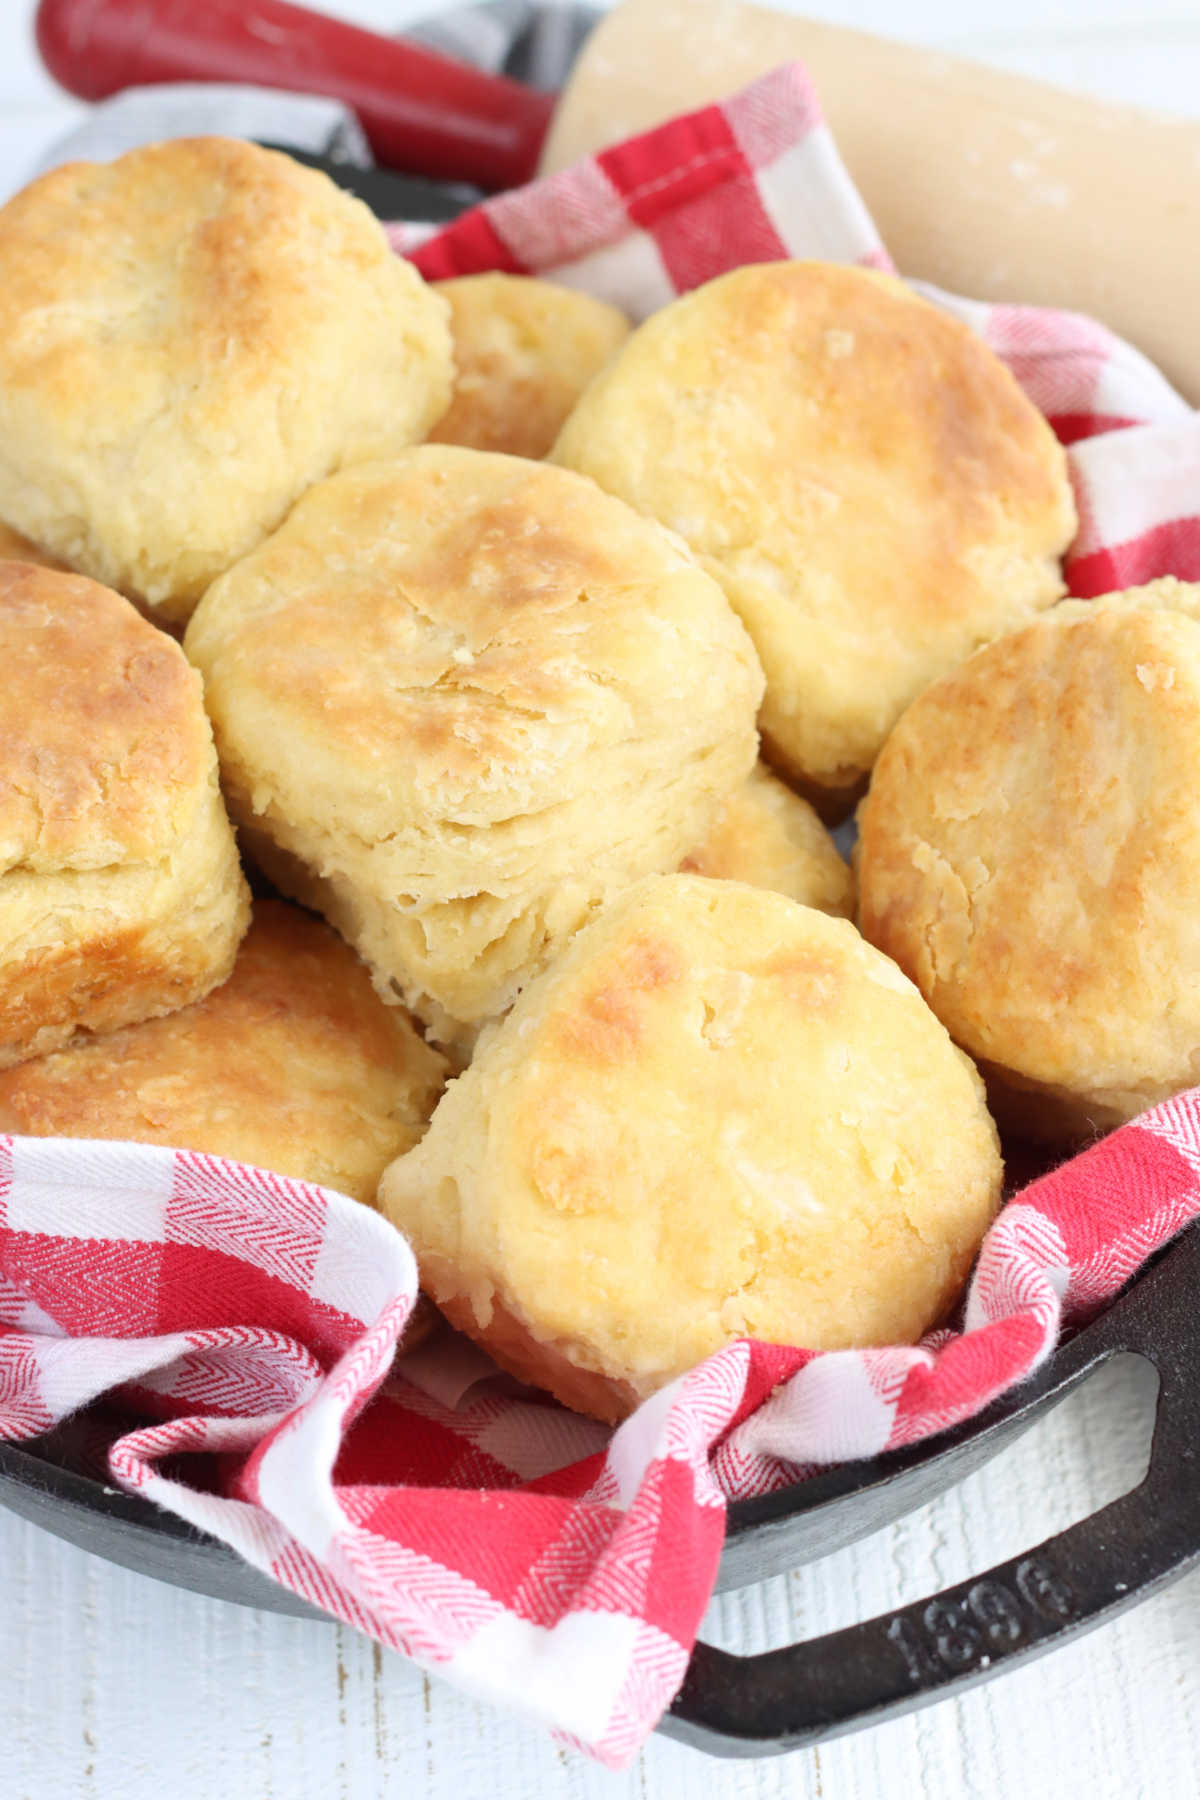 Biscuits in cast iron skillet with red checkered kitchen towel.